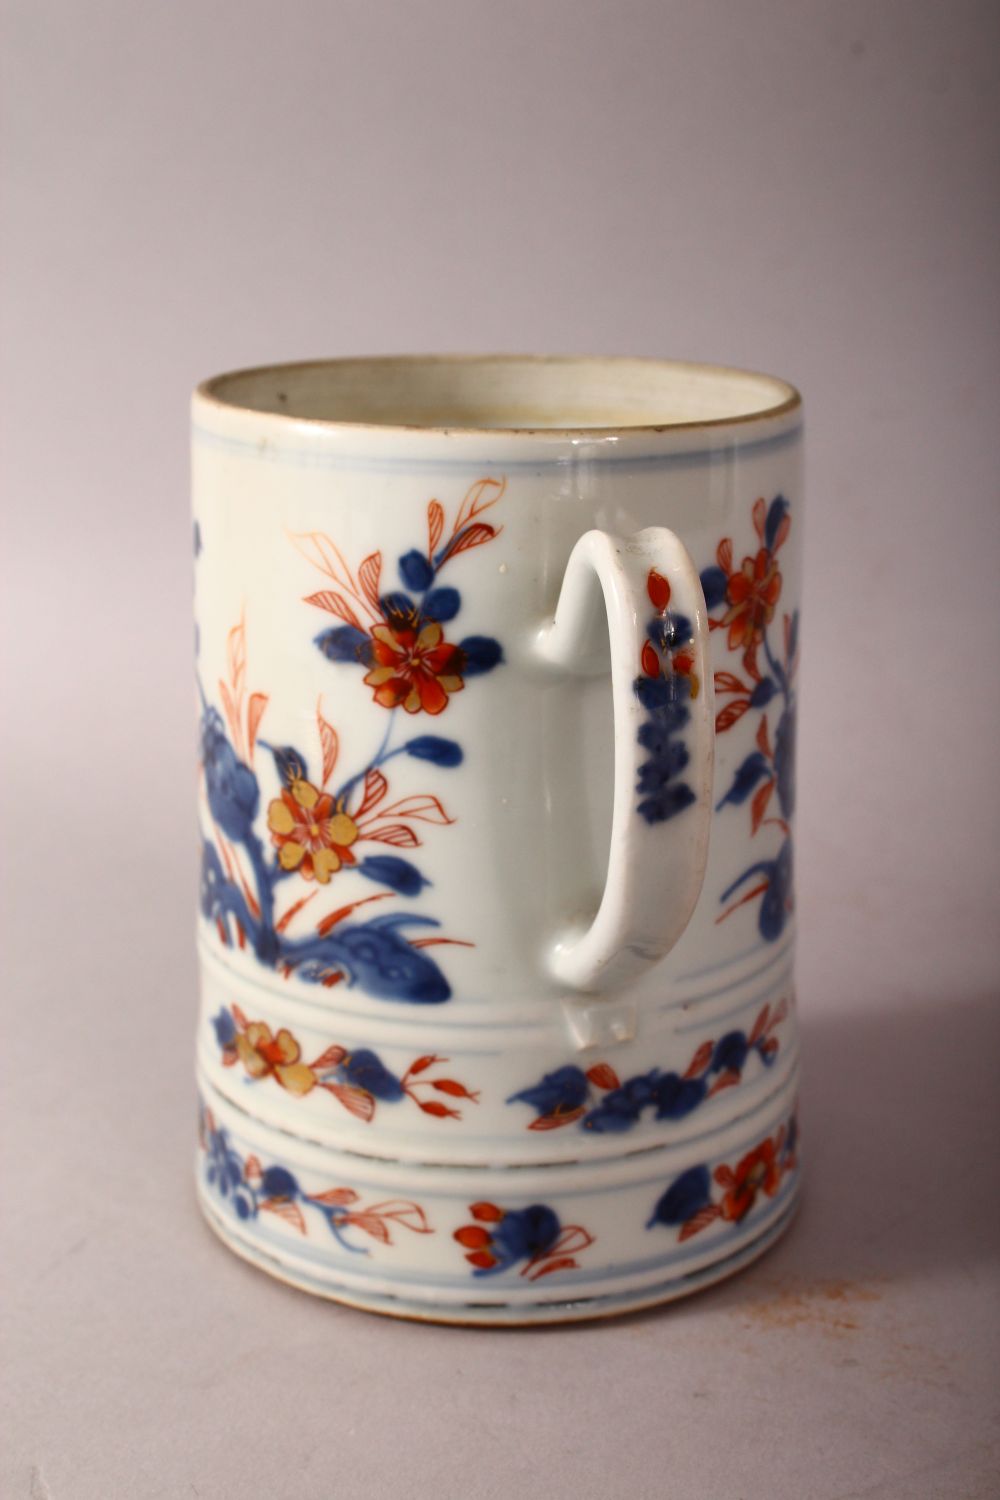 AN 18TH CENTURY CHINESE IMARI PORCELAIN TANKARD - decorated with underglaze blue and orange floral - Image 4 of 5